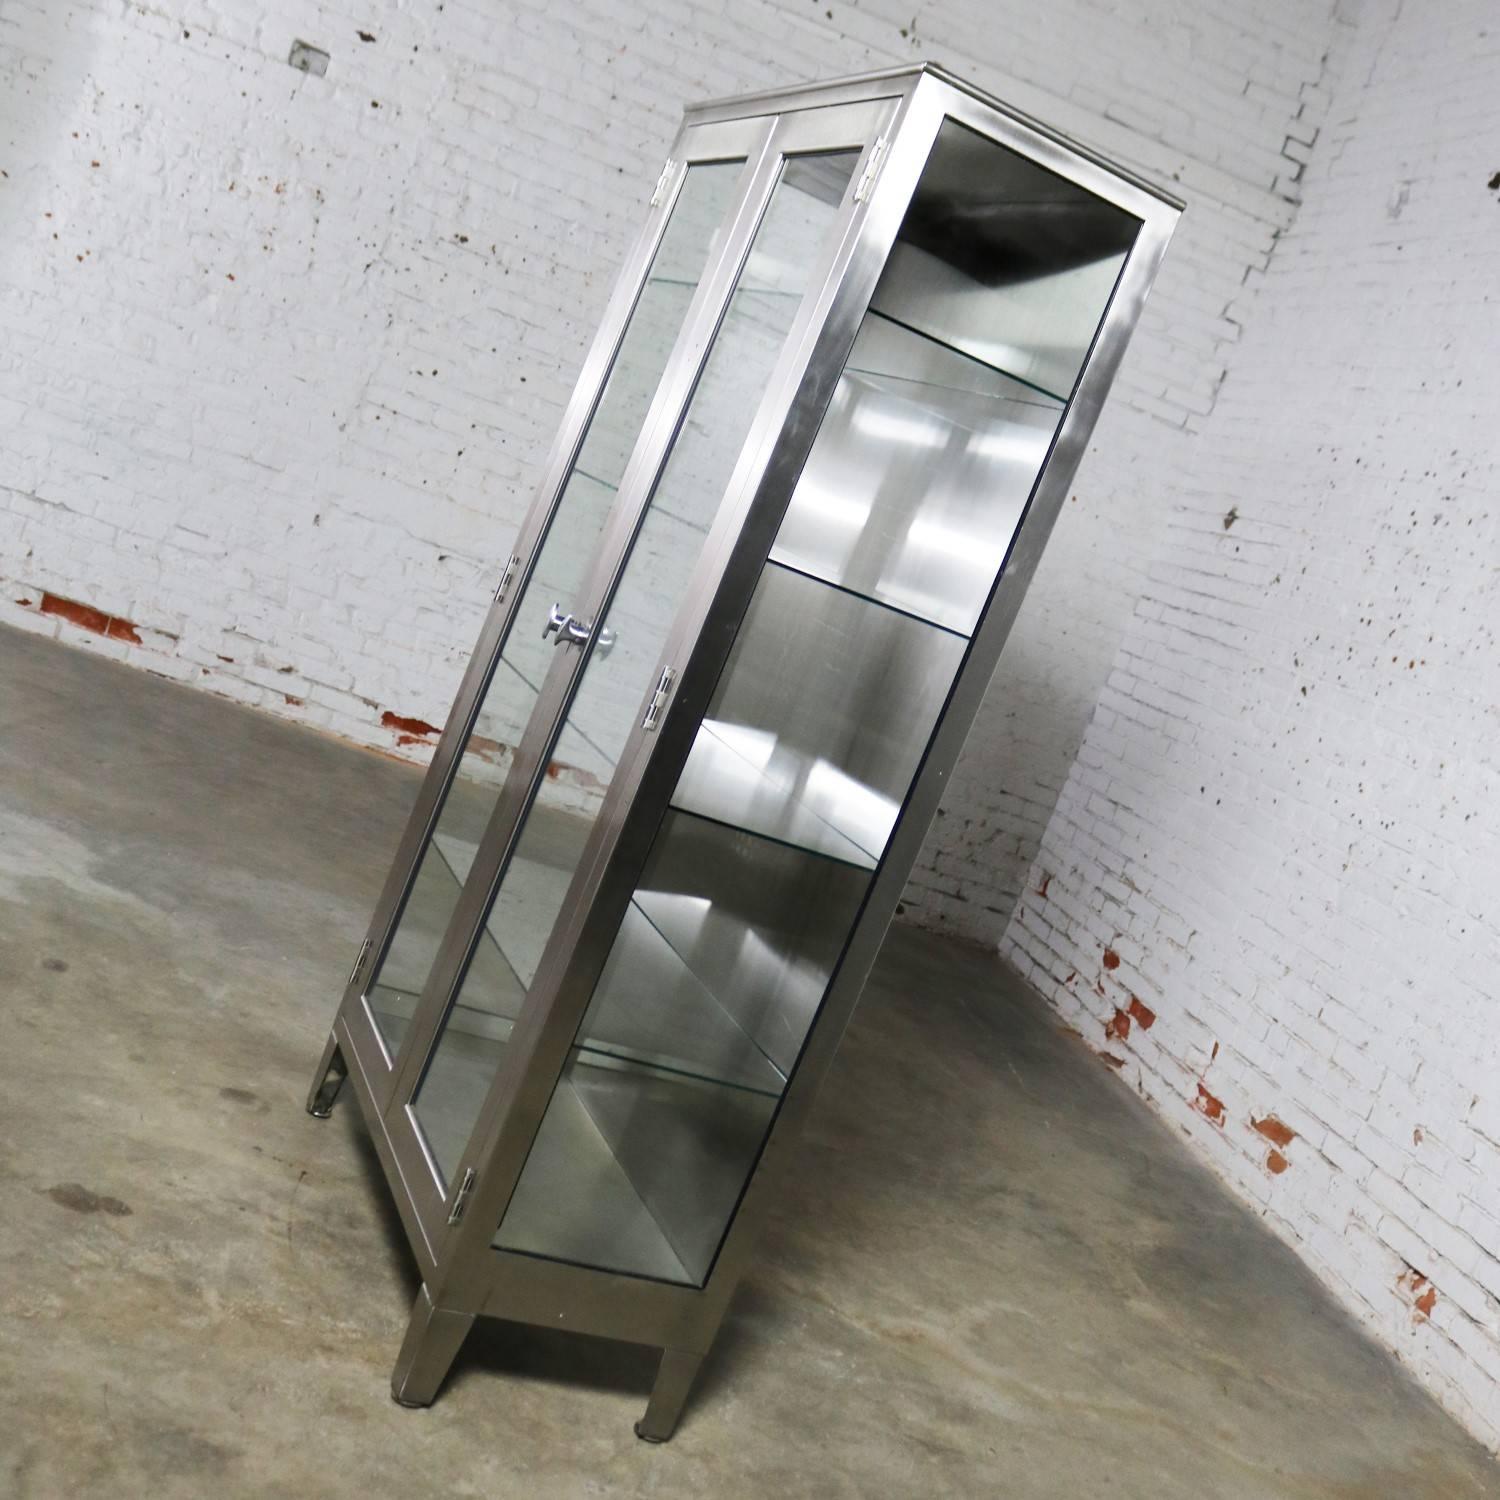 20th Century Vintage Stainless Steel Industrial Display Apothecary Medical Cabinet Glass Door